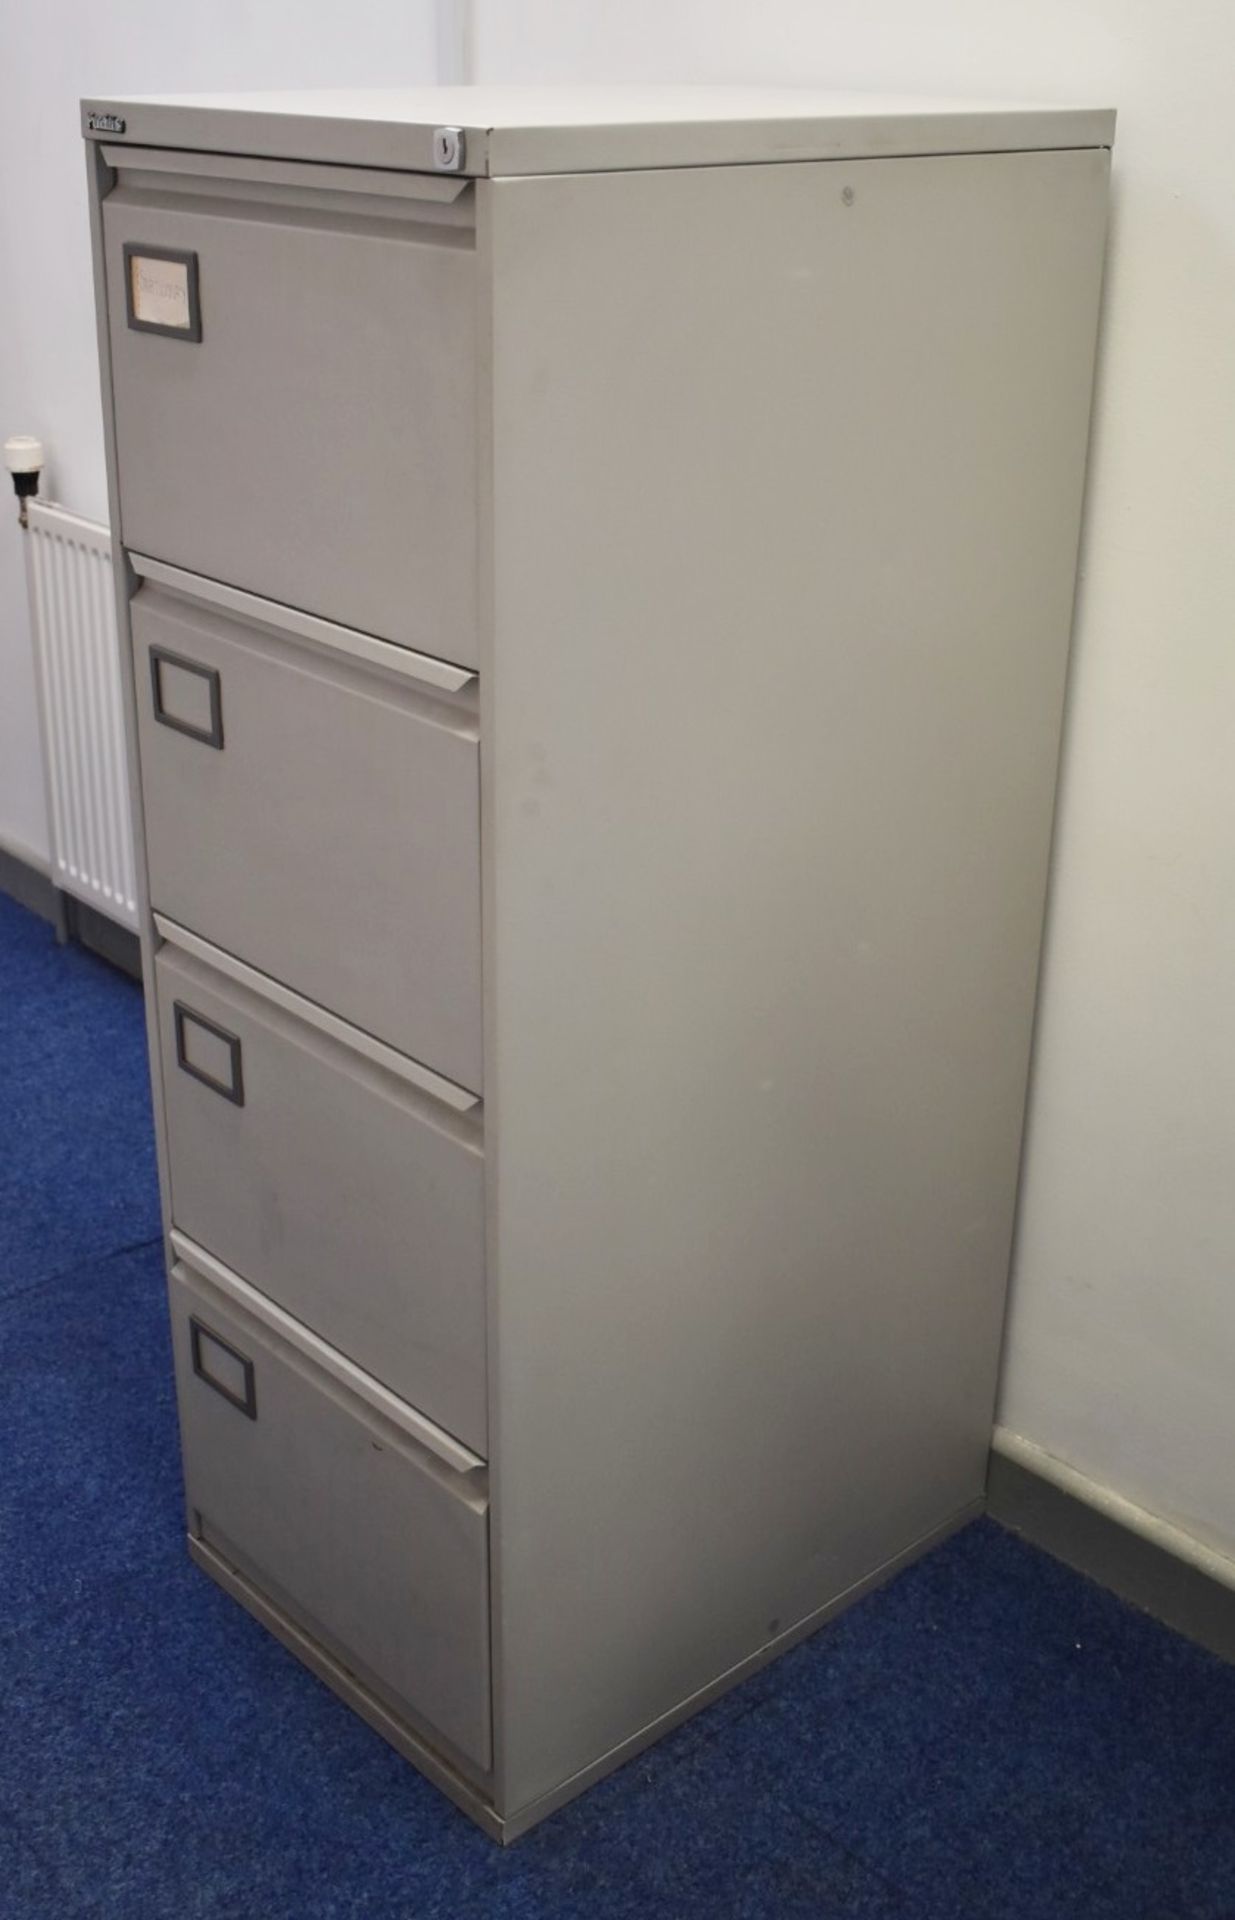 11 x Assorted Pieces of Office Furniture - Includes Desk, Chair, Pedestals, Filing Cabinet, - Image 7 of 8